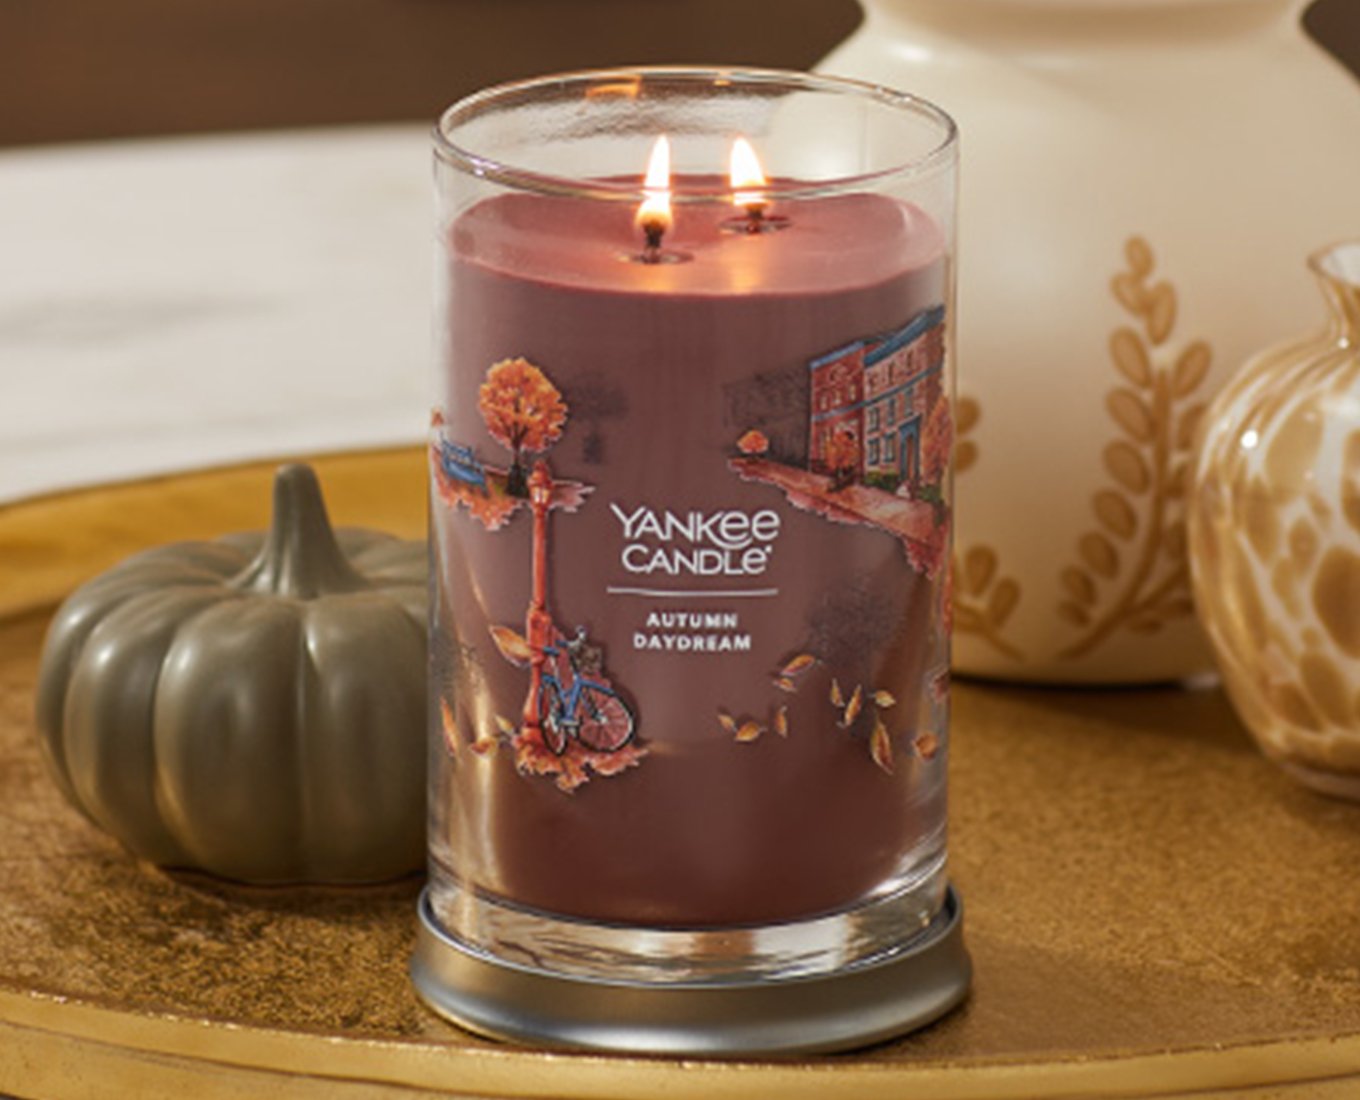 Autumn Daydream in a Signature Large Jar Candle 